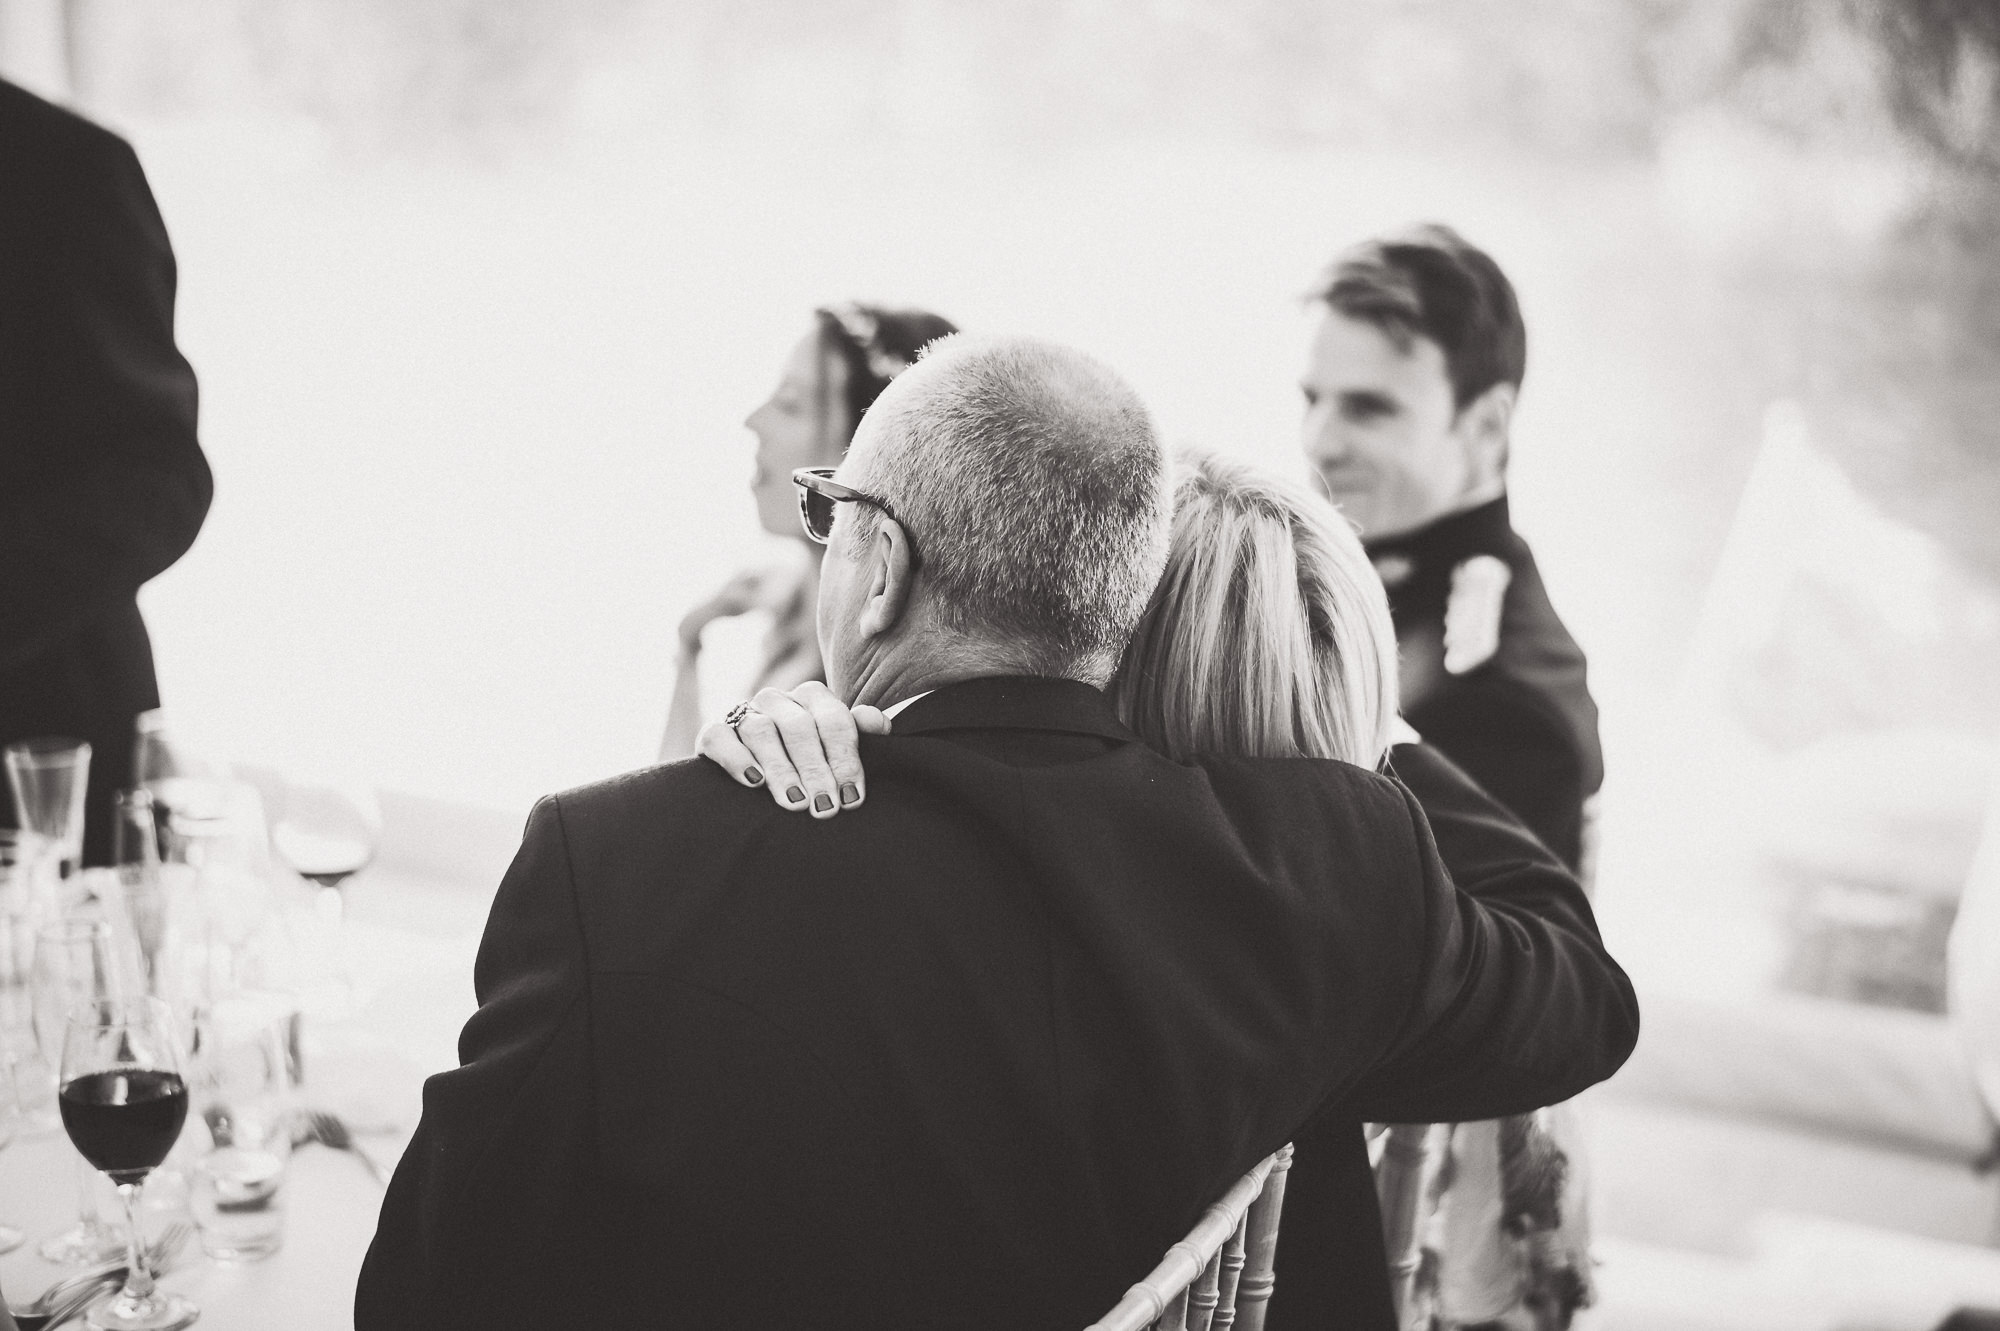 A black and white wedding photo capturing a groom hugging his bride.